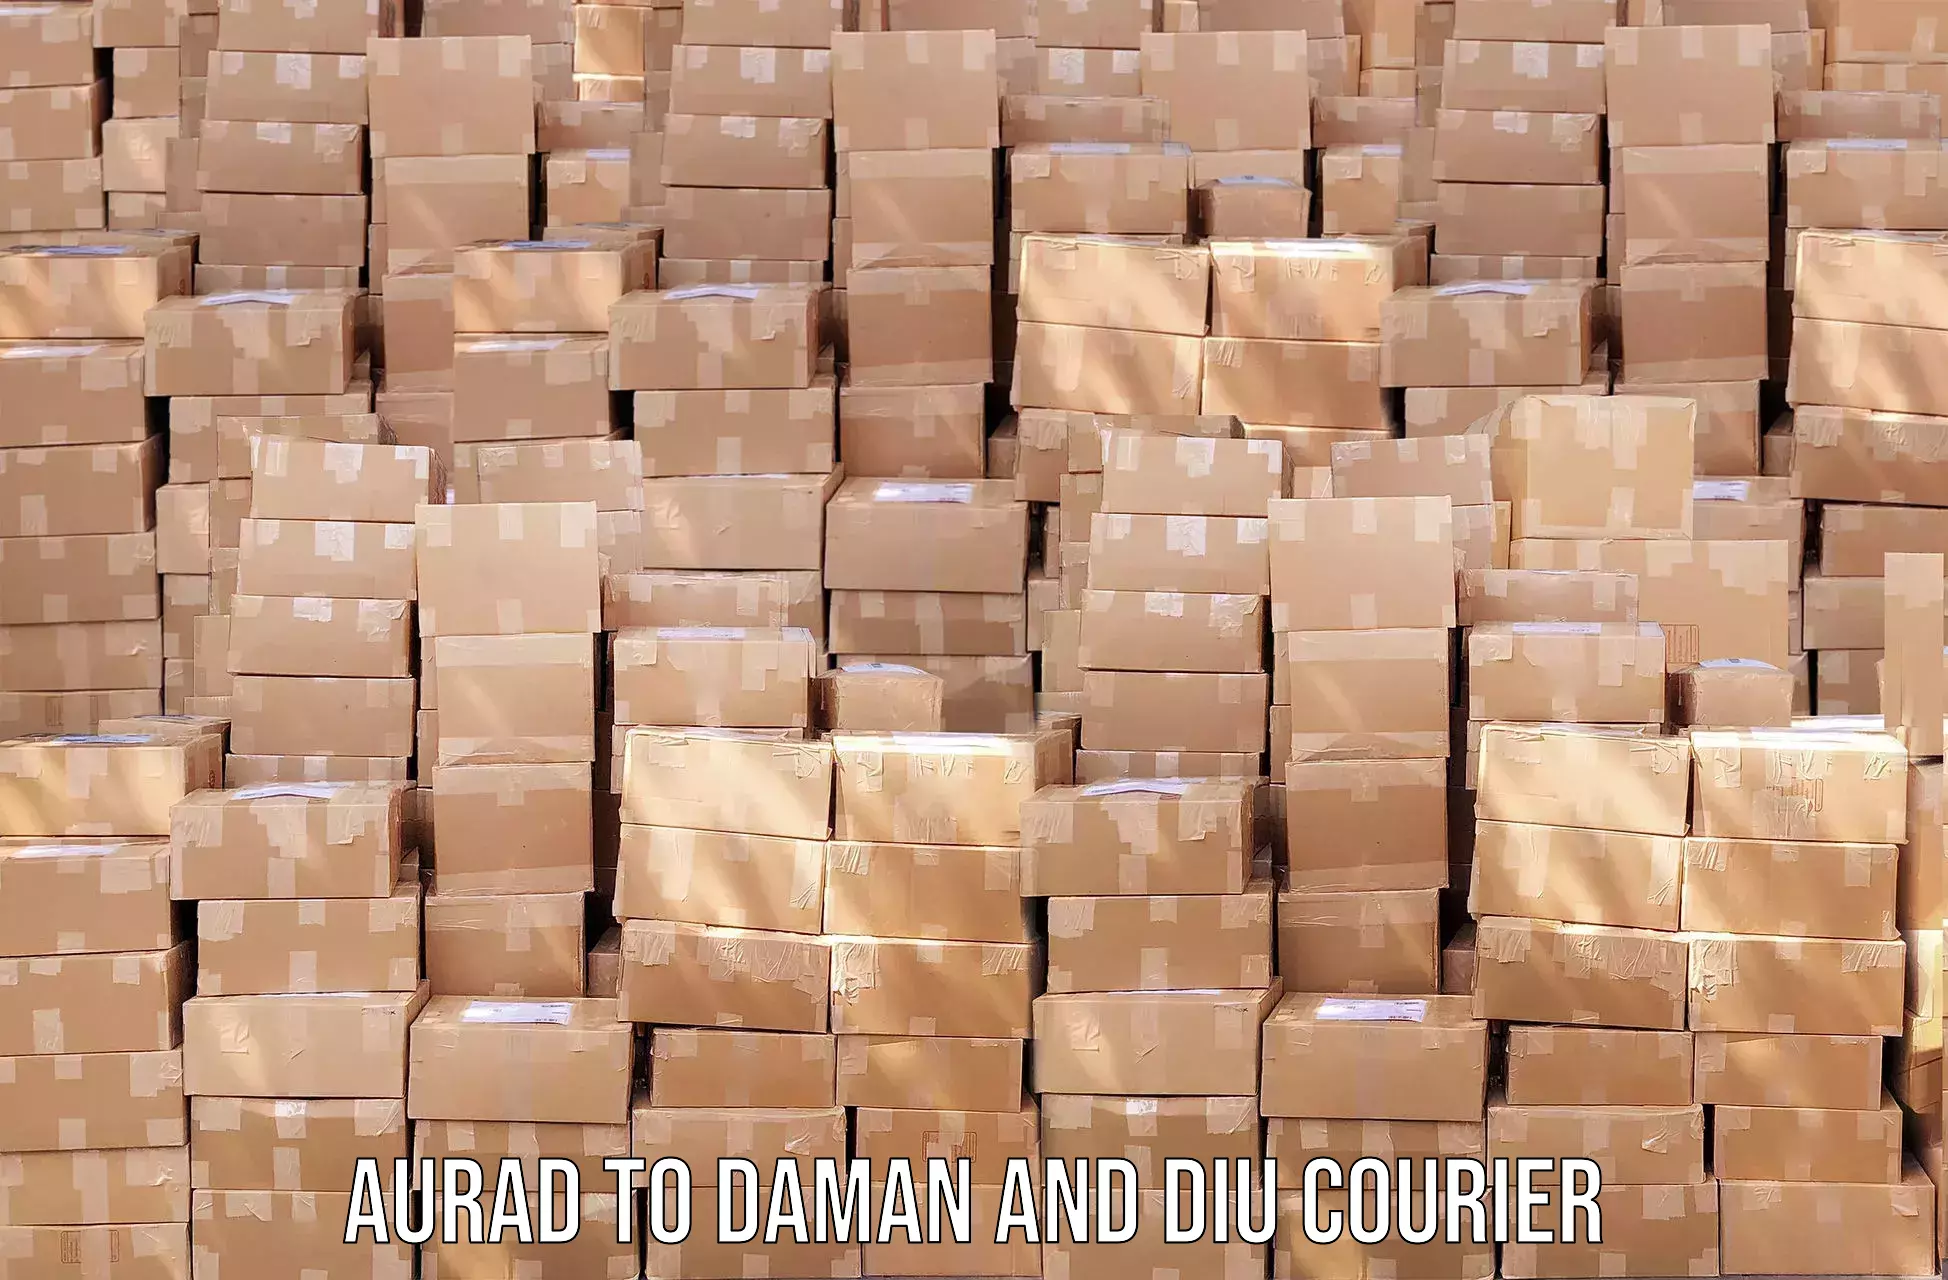 Commercial shipping rates in Aurad to Diu